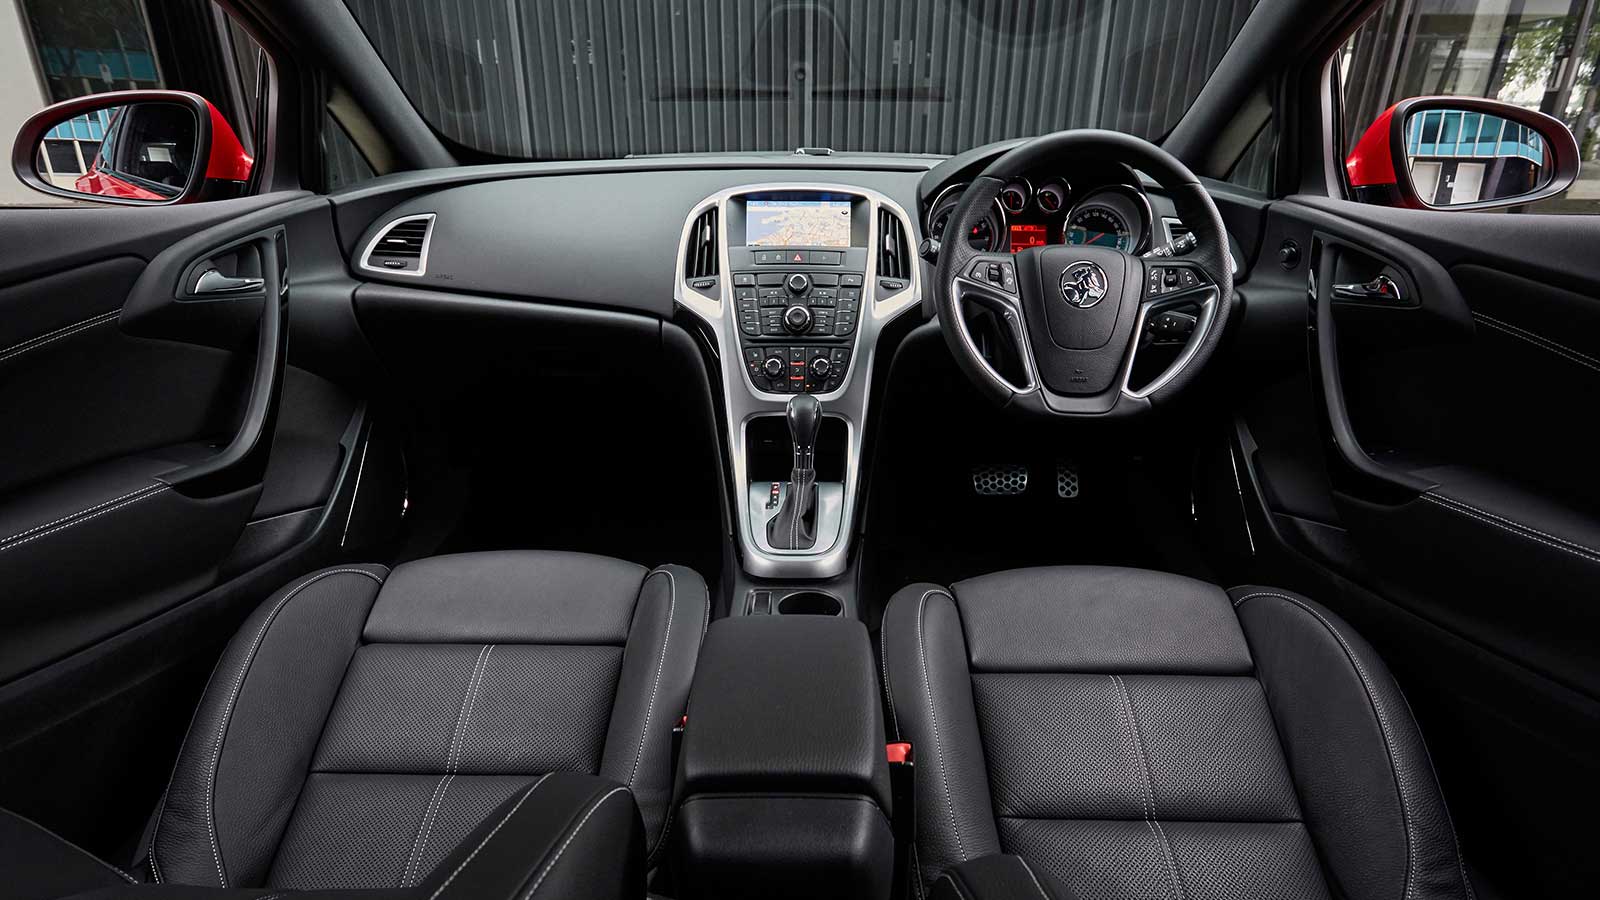 Holden Astra GTC Interior front view